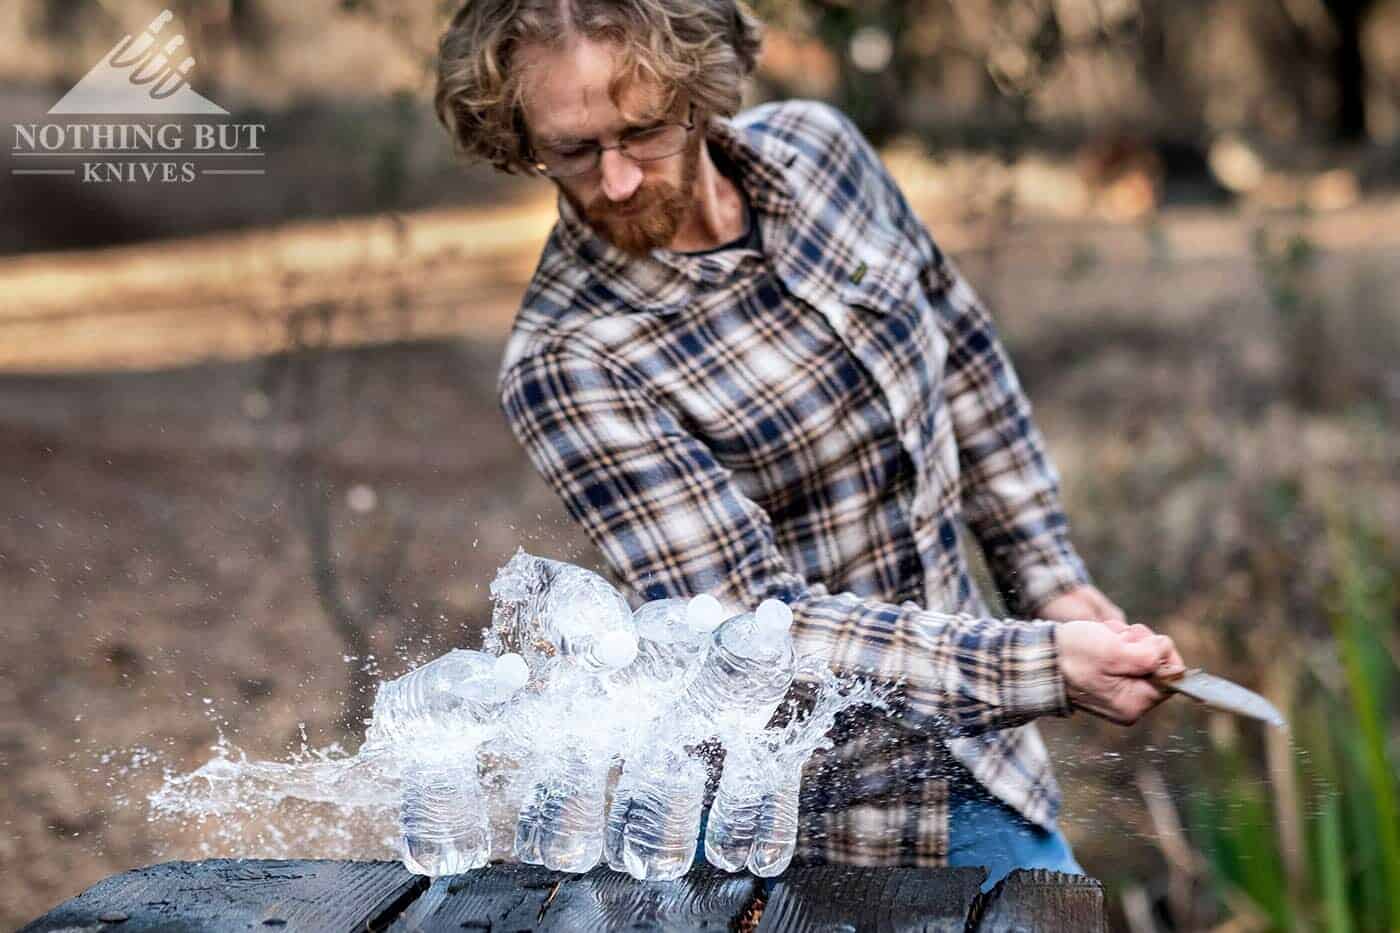 Testing the tactical ability of the Ka-Bar Becker Harpoon by slicing through water bottles. 